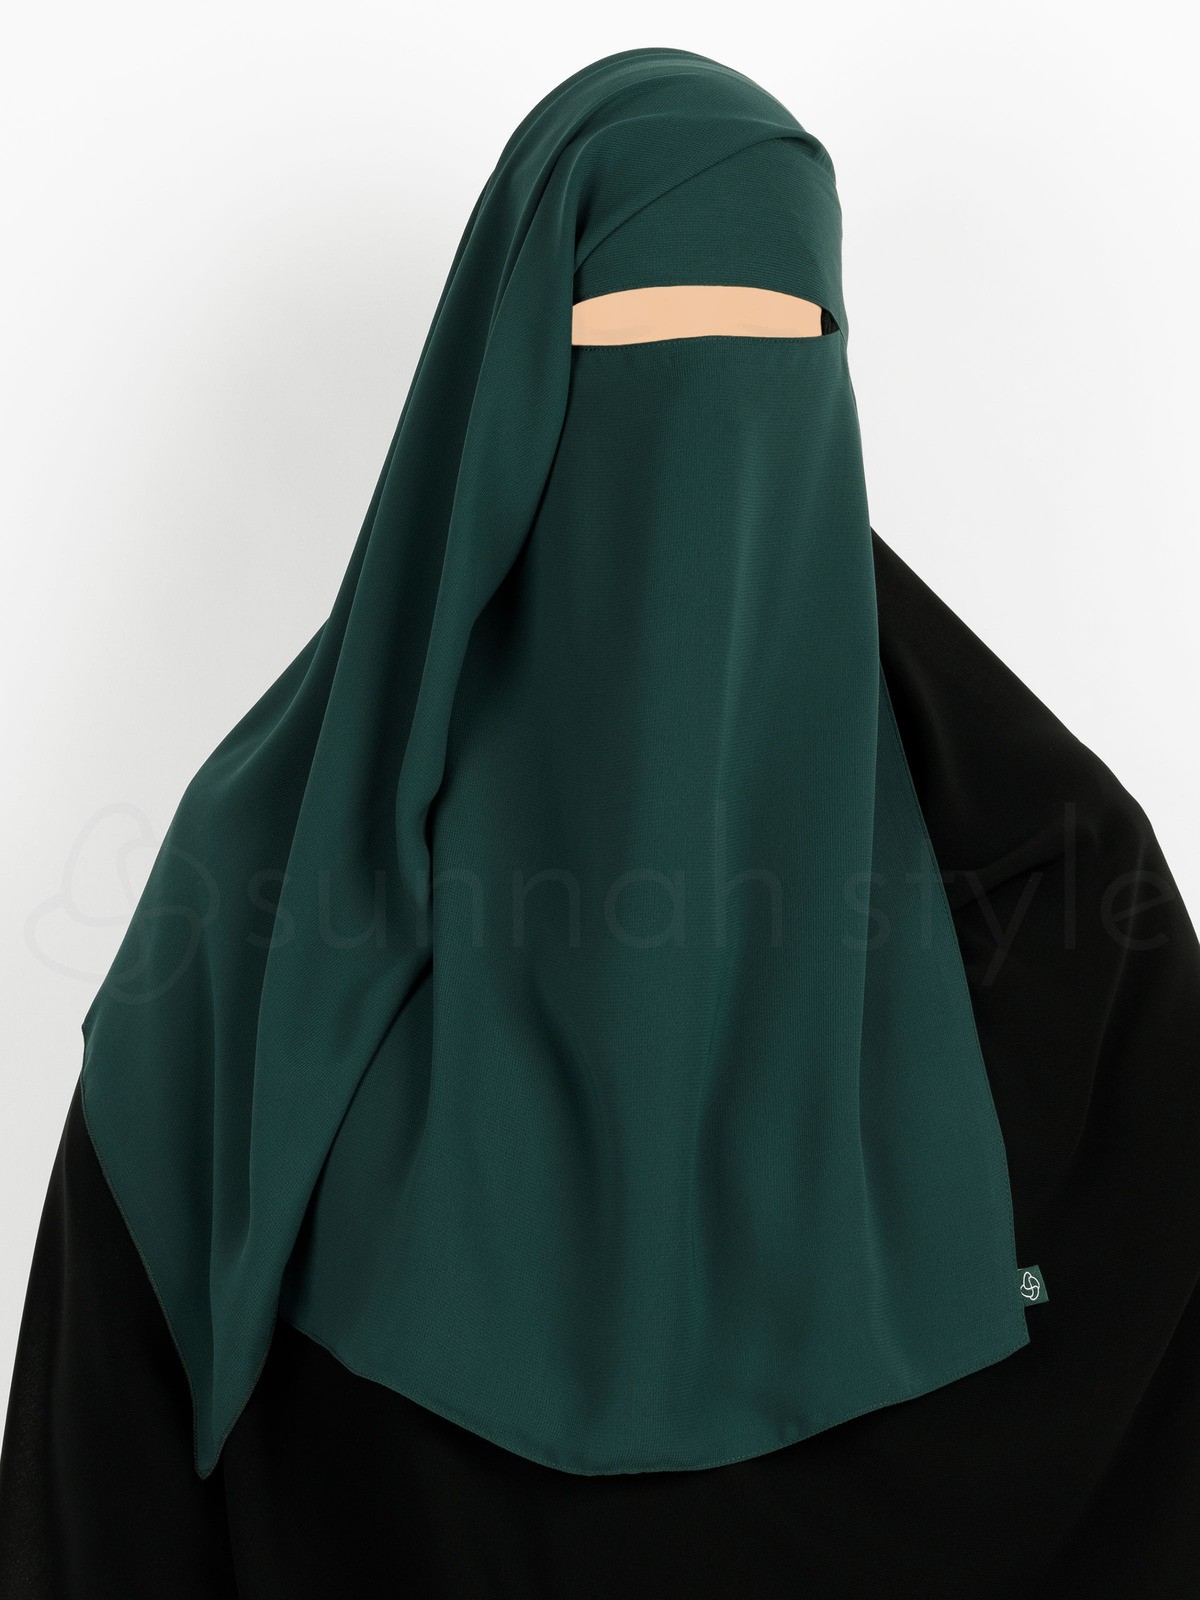 Sunnah Style - Two Layer Niqab (Pine)